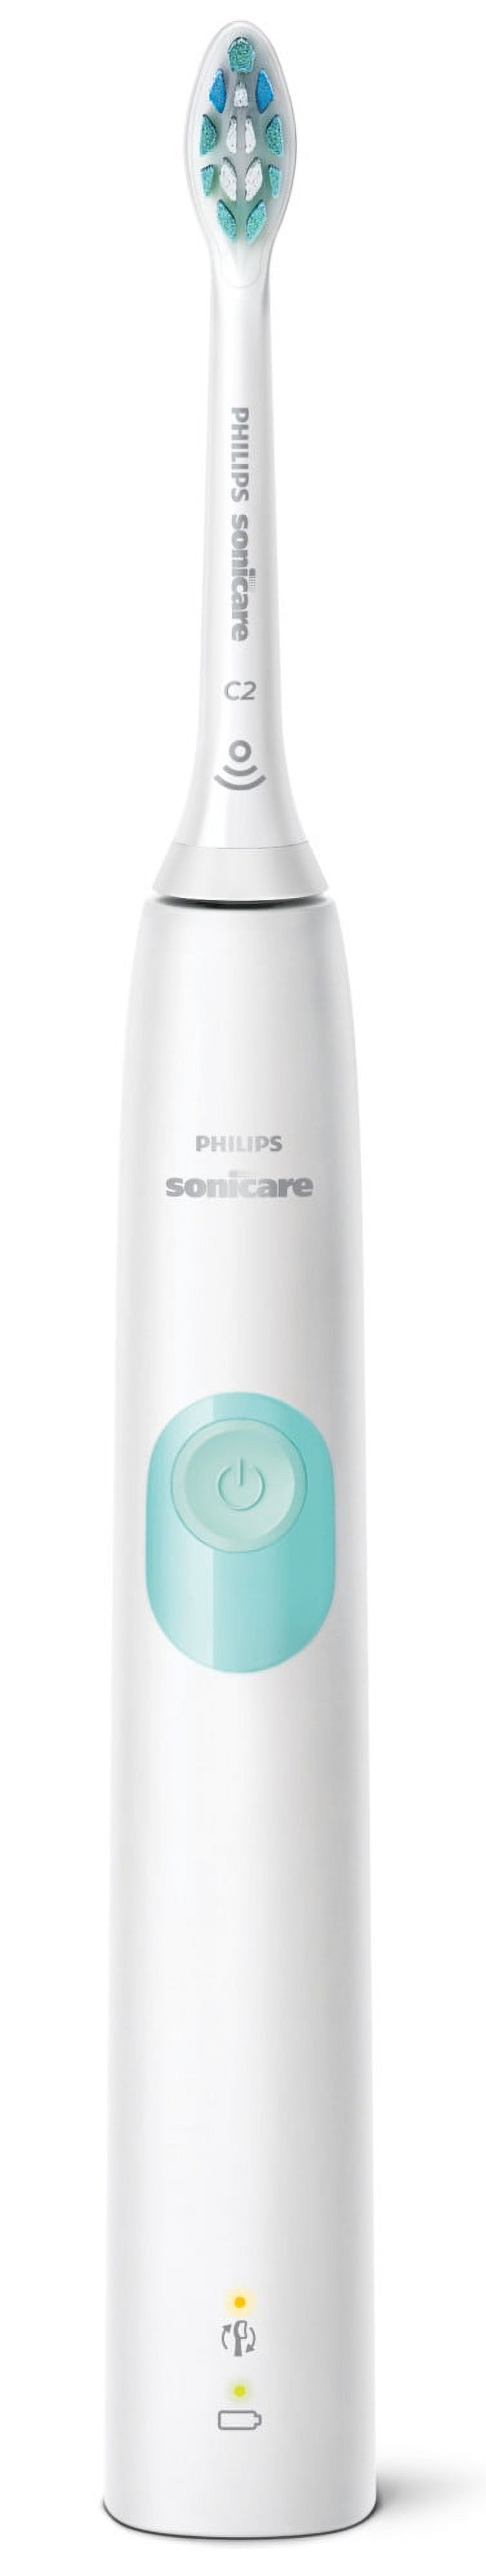 Philips Sonicare ProtectiveClean 4100 Plaque Control, Rechargeable Electric Toothbrush with Pressure Sensor, White Mint HX6817/01 - image 10 of 14